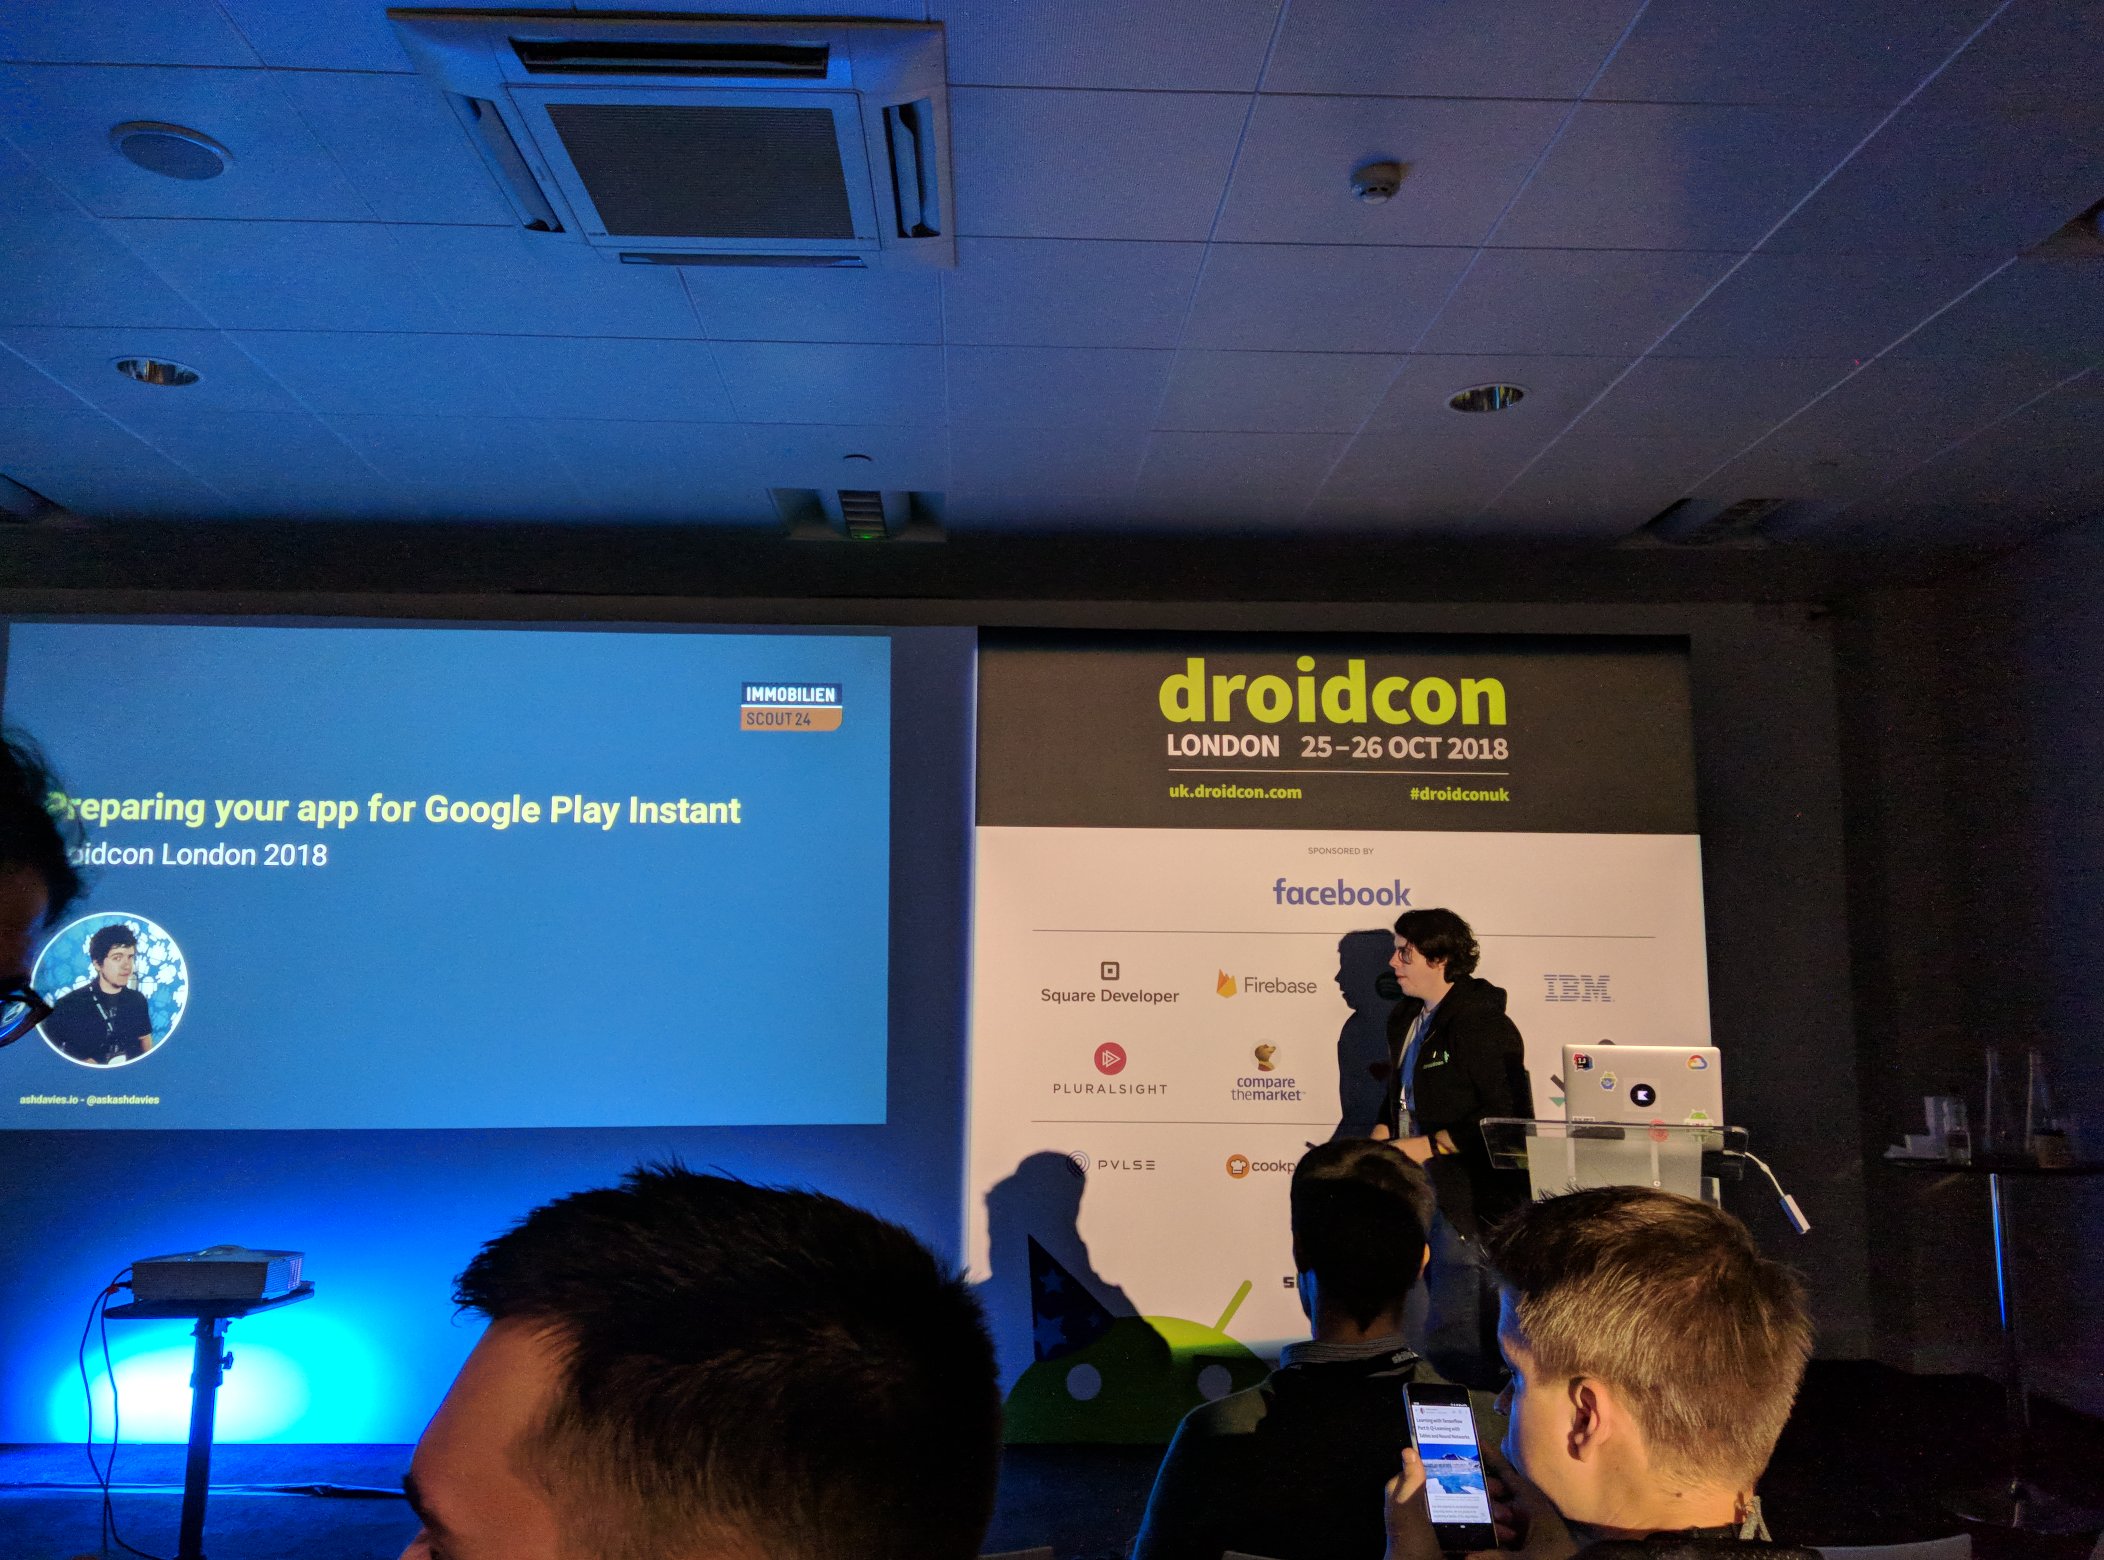 Droidcon London: Preparing Your App for Google Play Instant